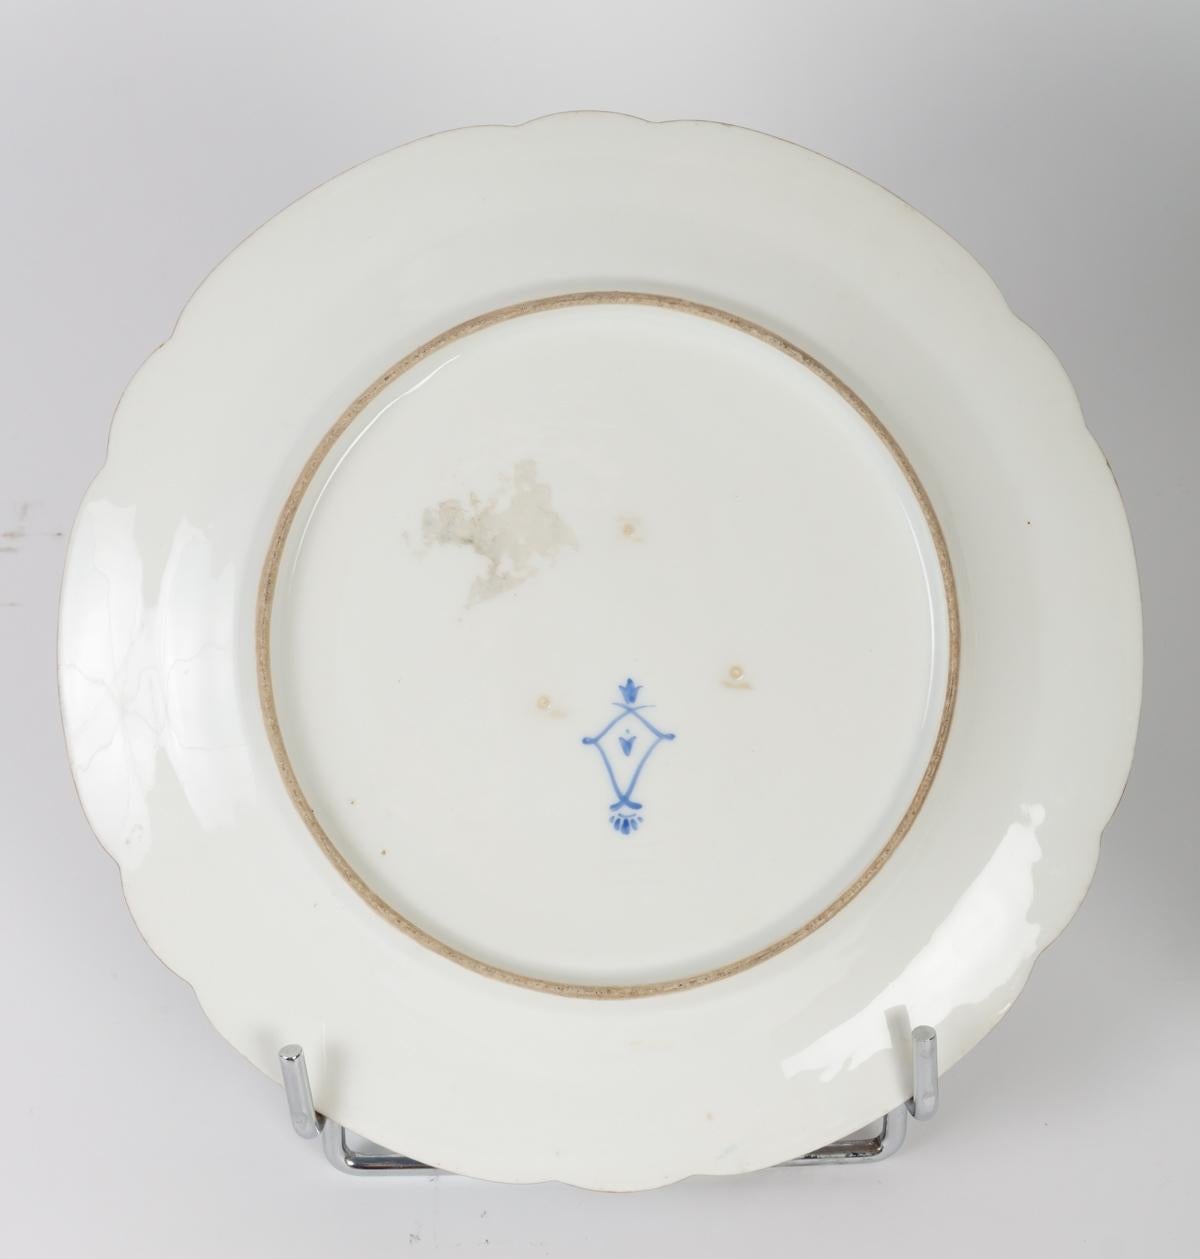 Napoleon III Series of Sèvres Porcelain Plates from the 19th Century